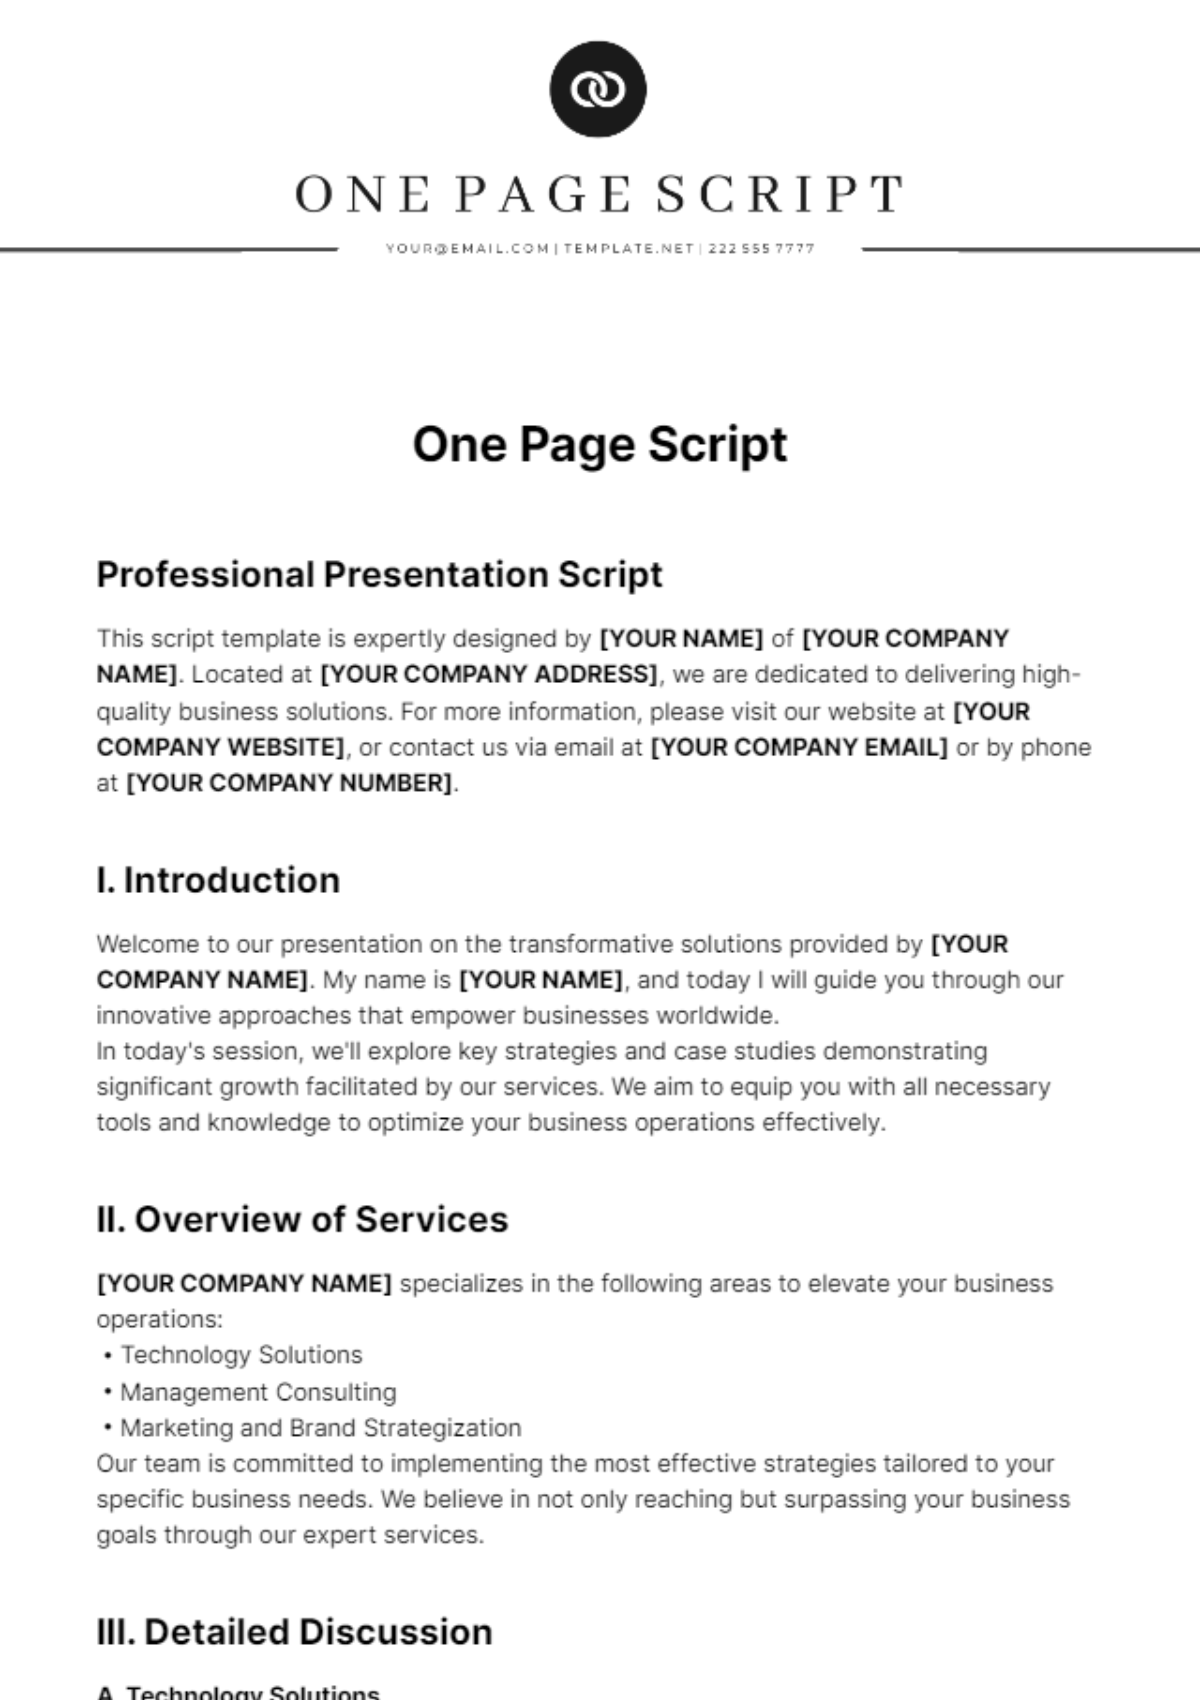 One Page Script Template